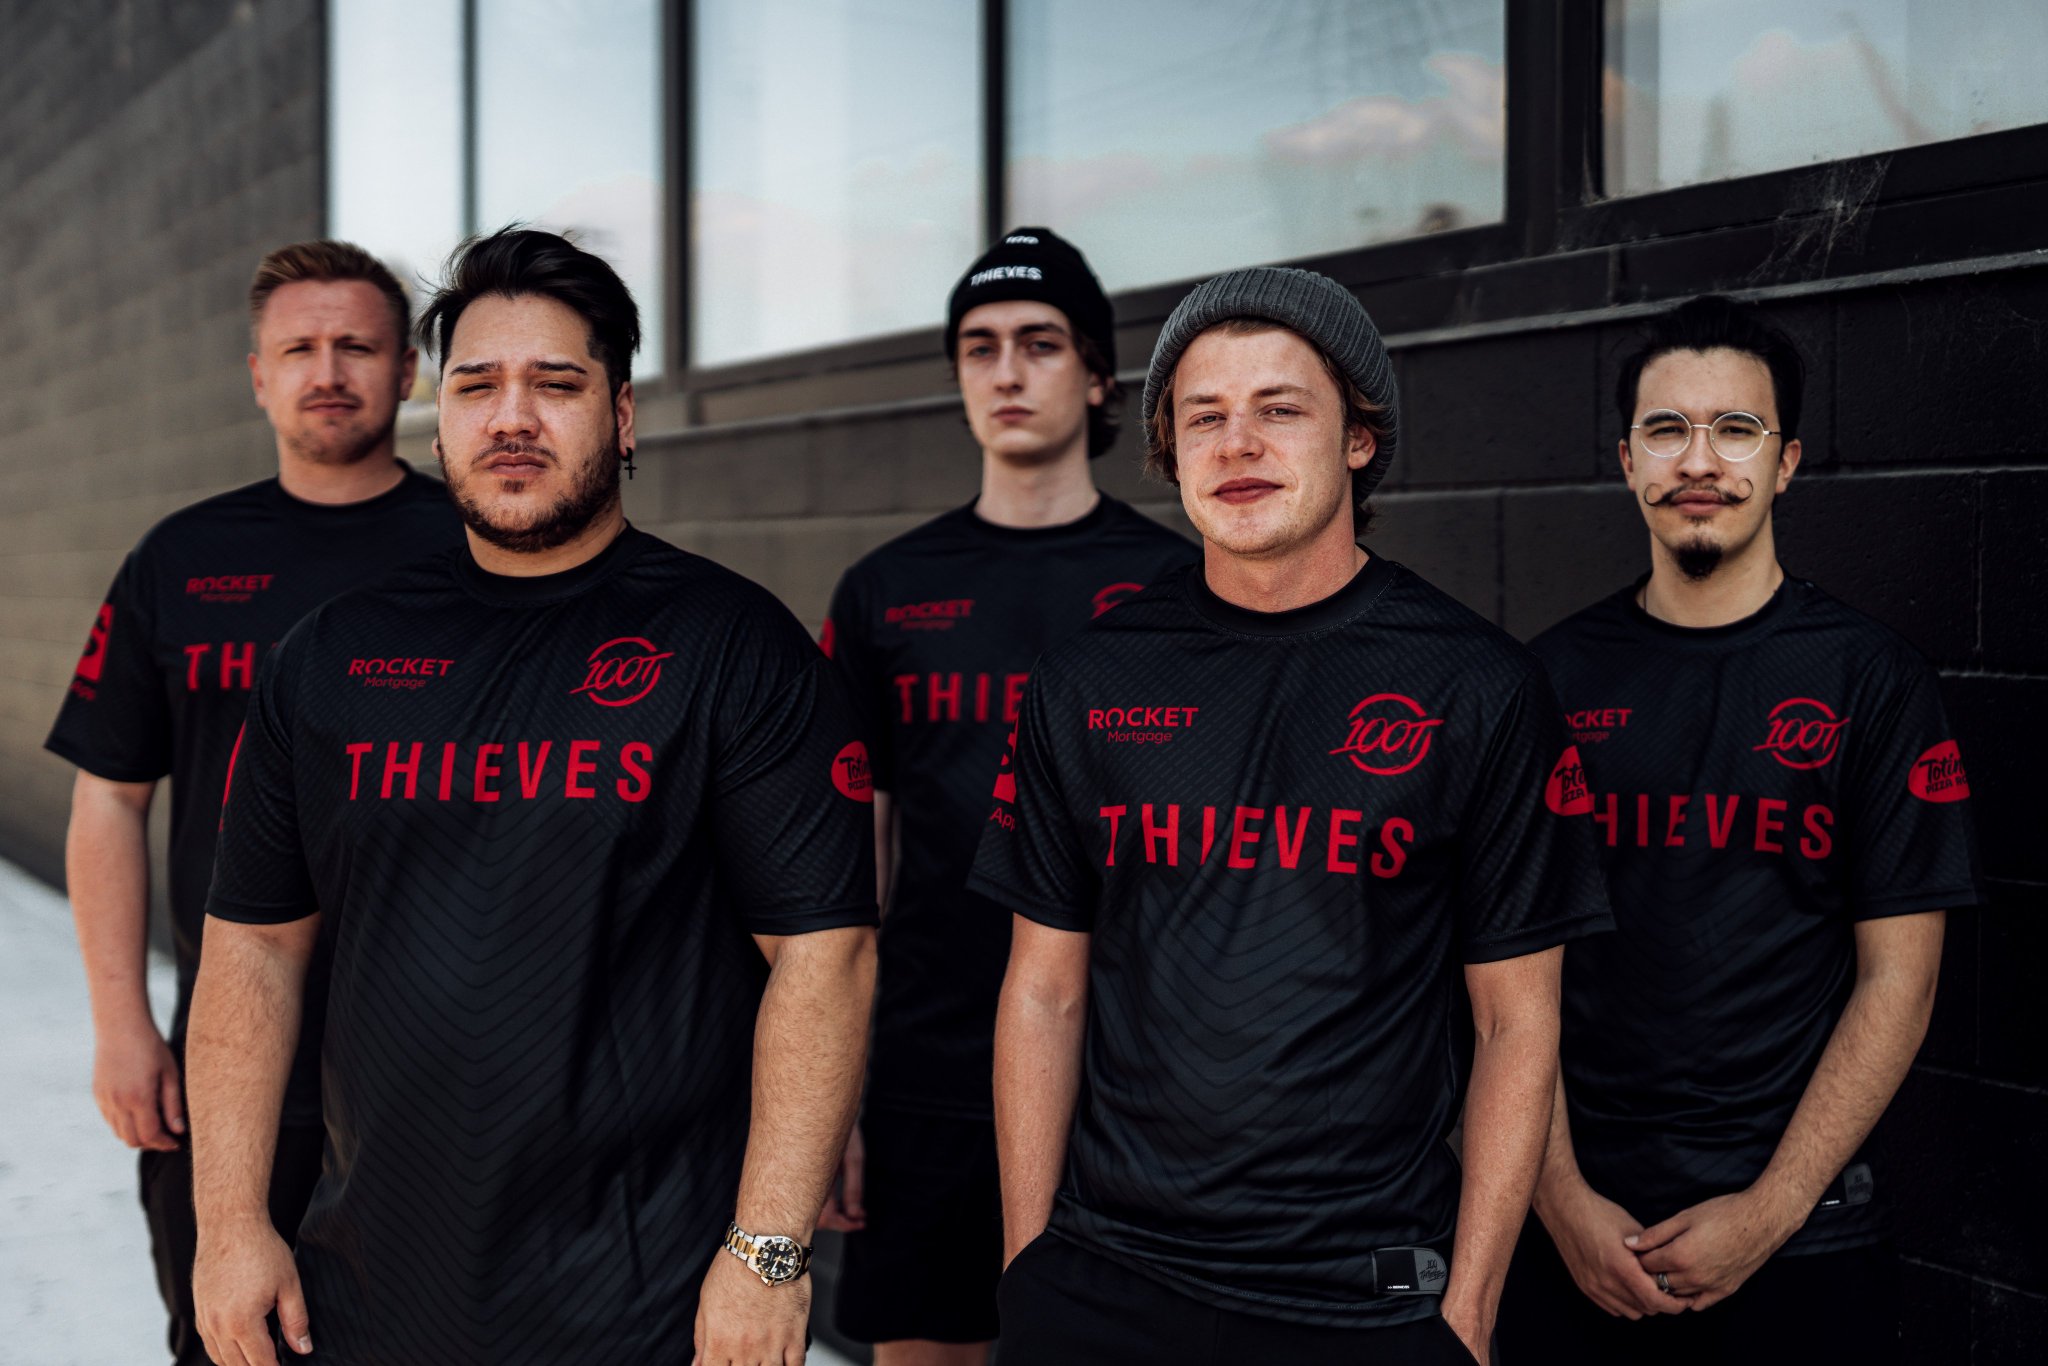 100 Thieves on Twitter.